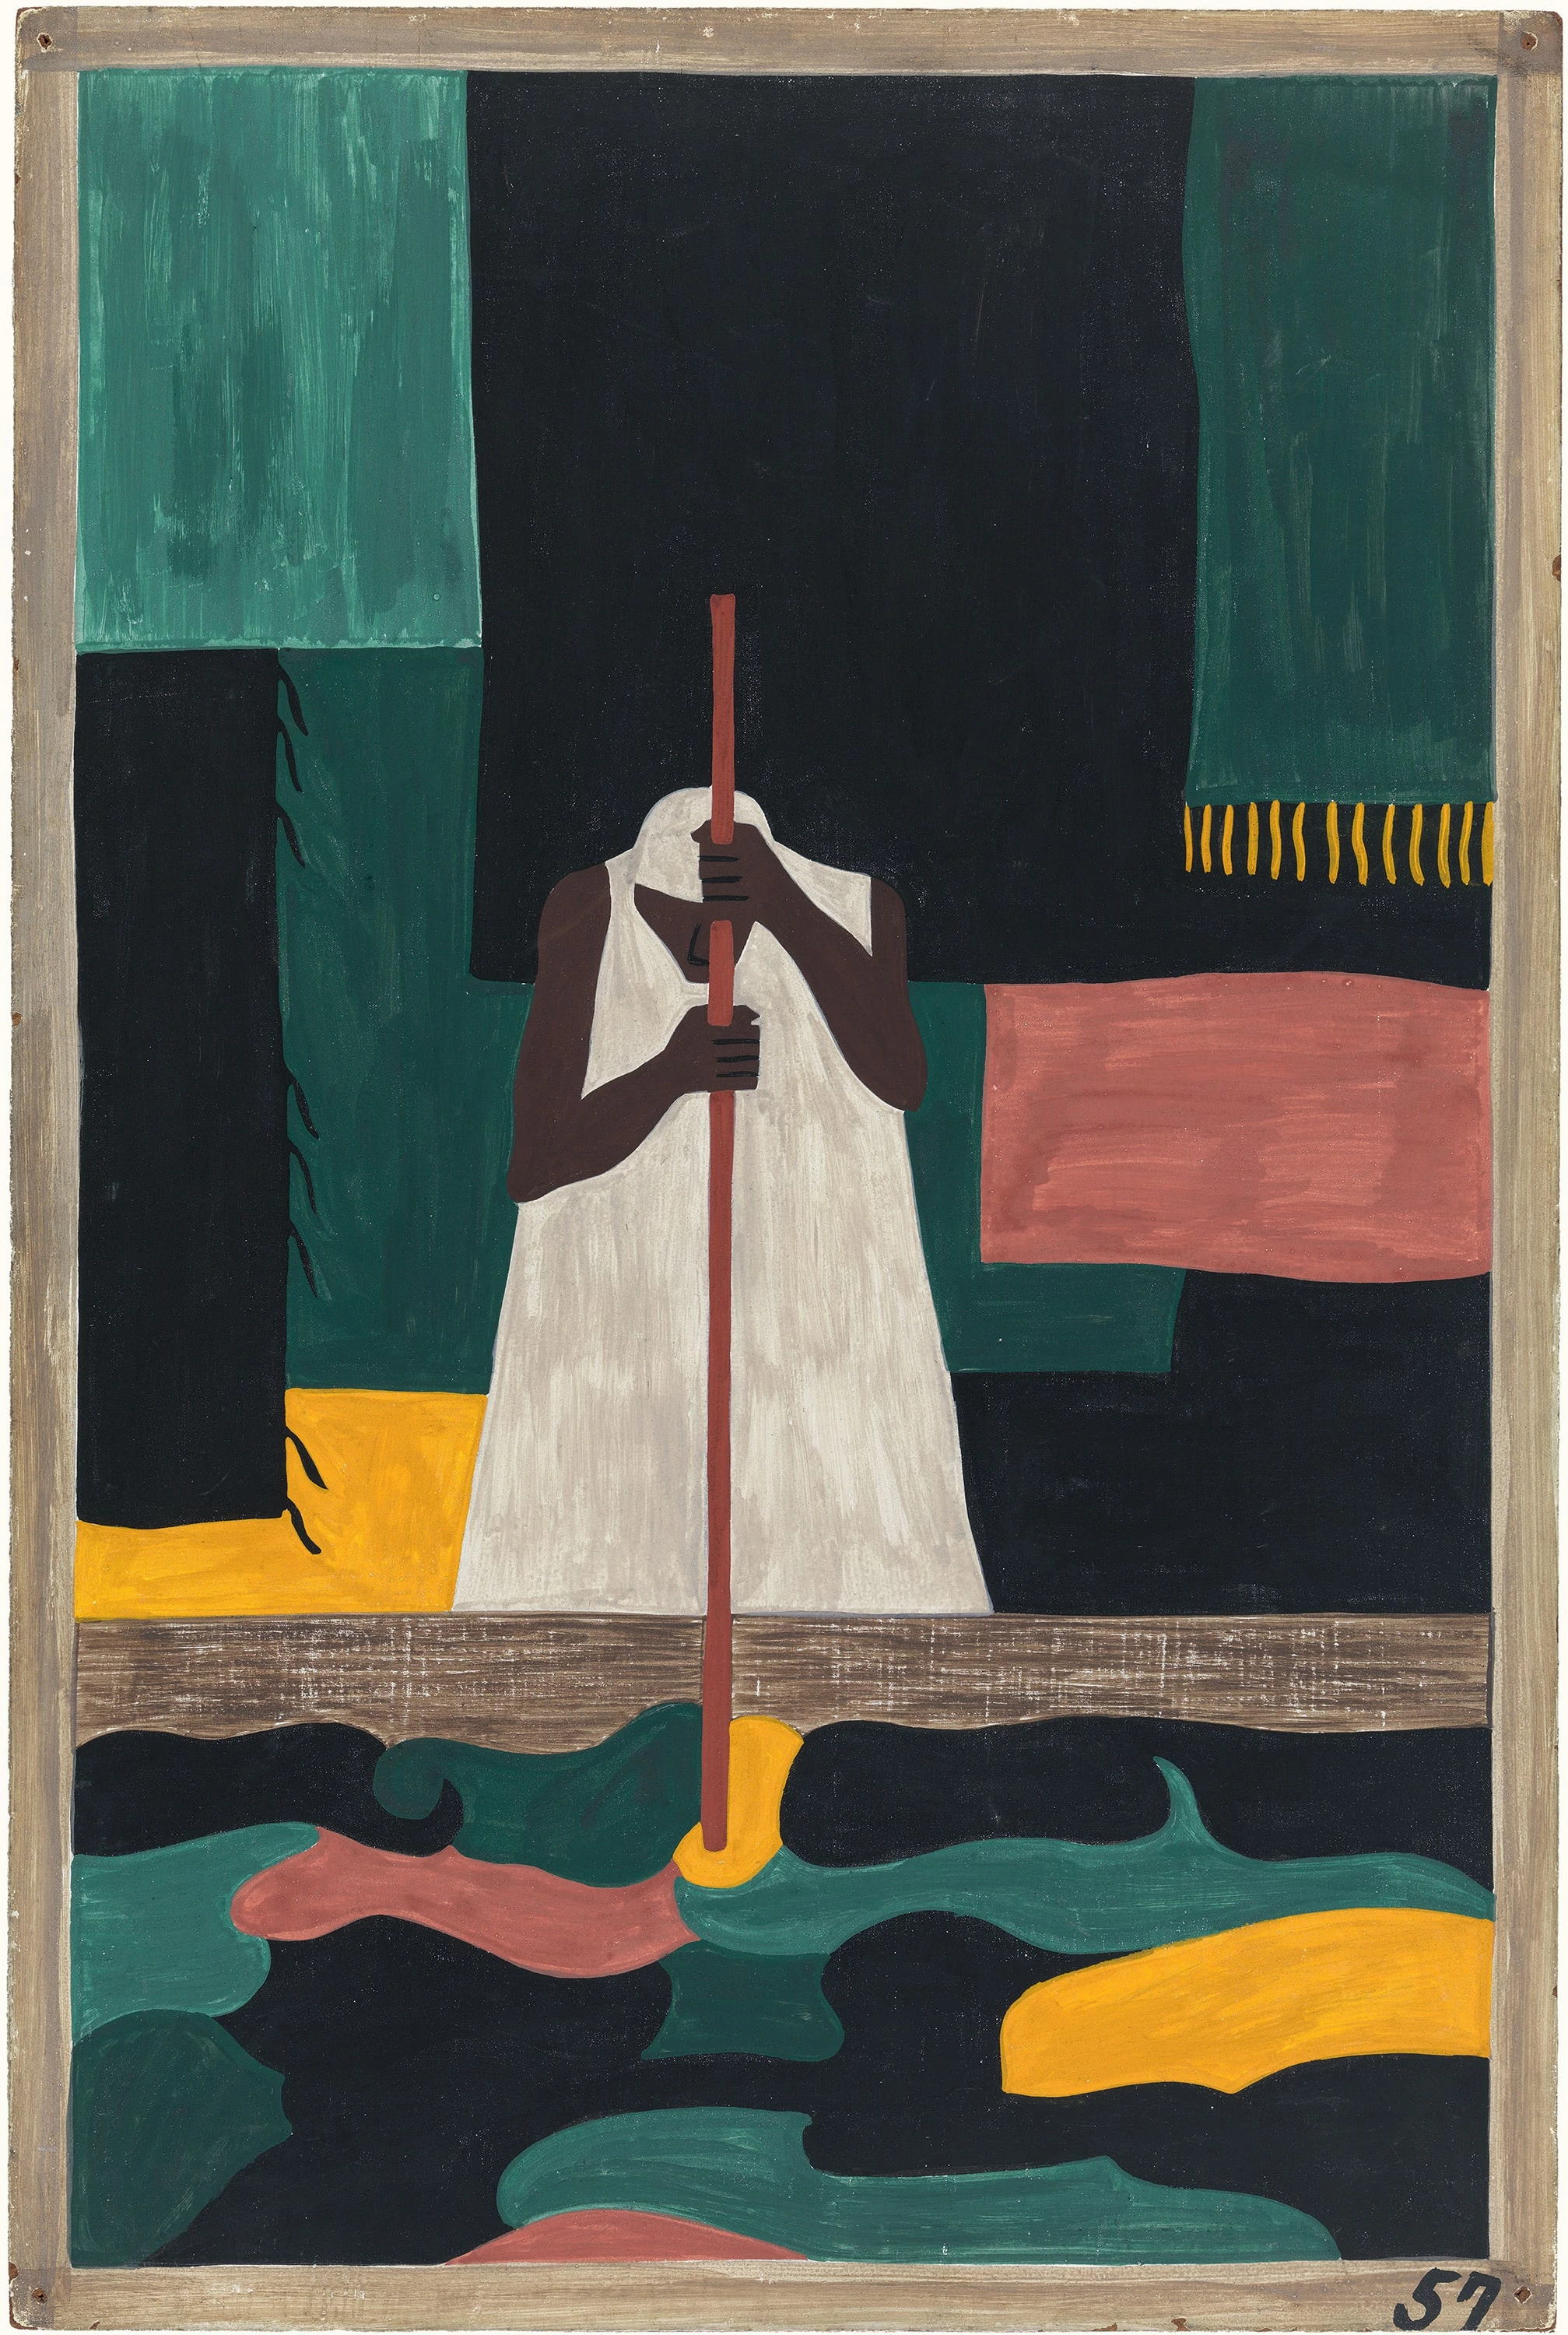 Migration Series No.57: The female workers were the last to arrive north, Jacob Lawrence